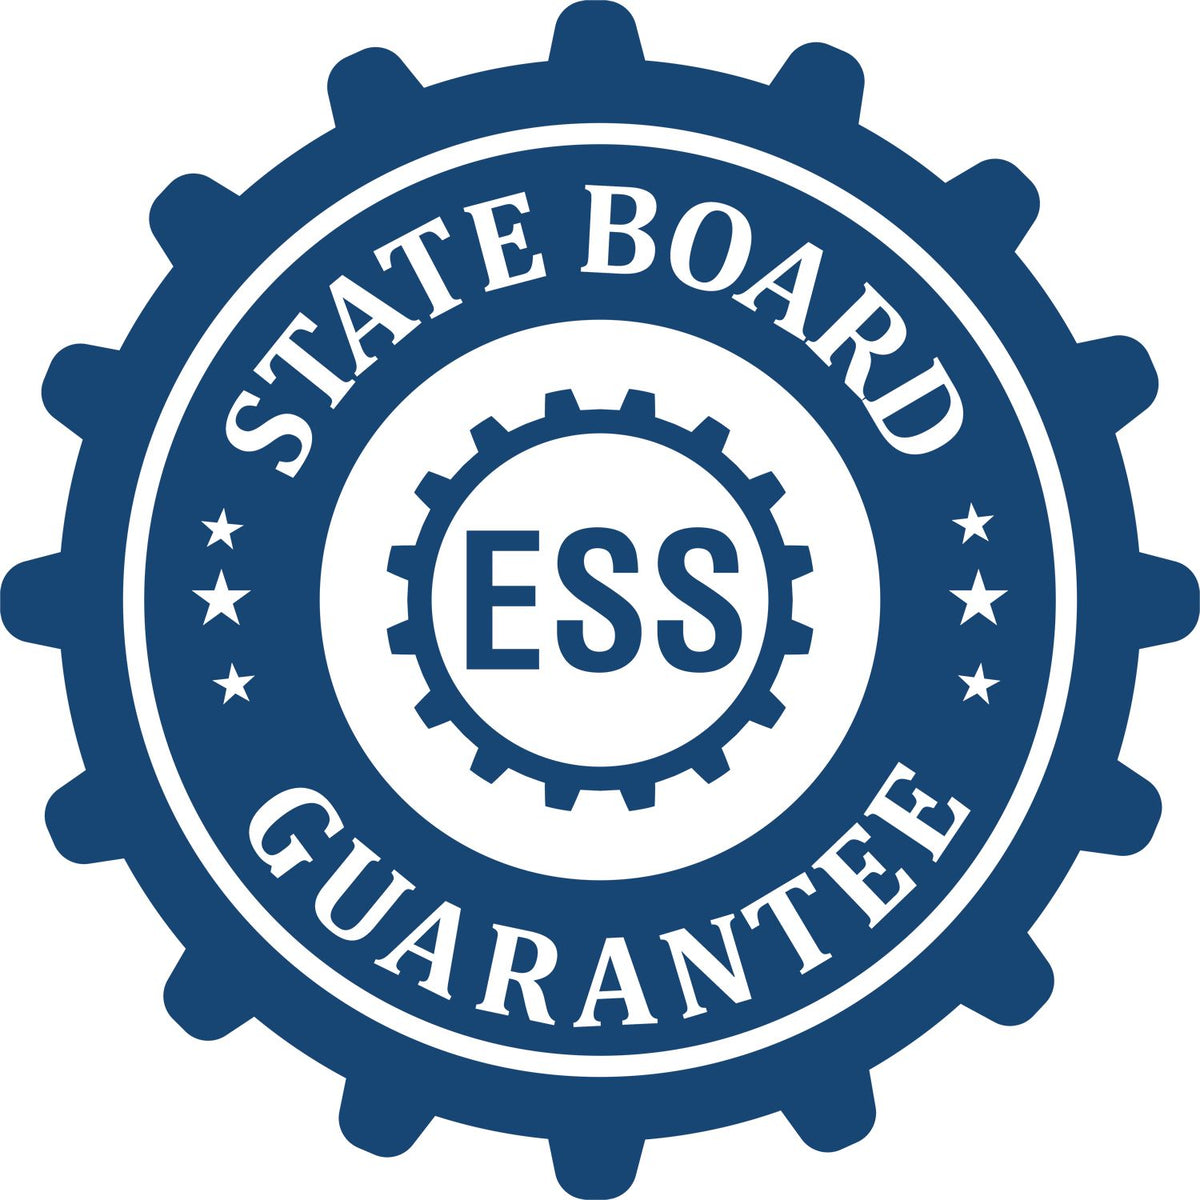 An emblem in a gear shape illustrating a state board guarantee for the Digital Alaska PE Stamp and Electronic Seal for Alaska Engineer product.